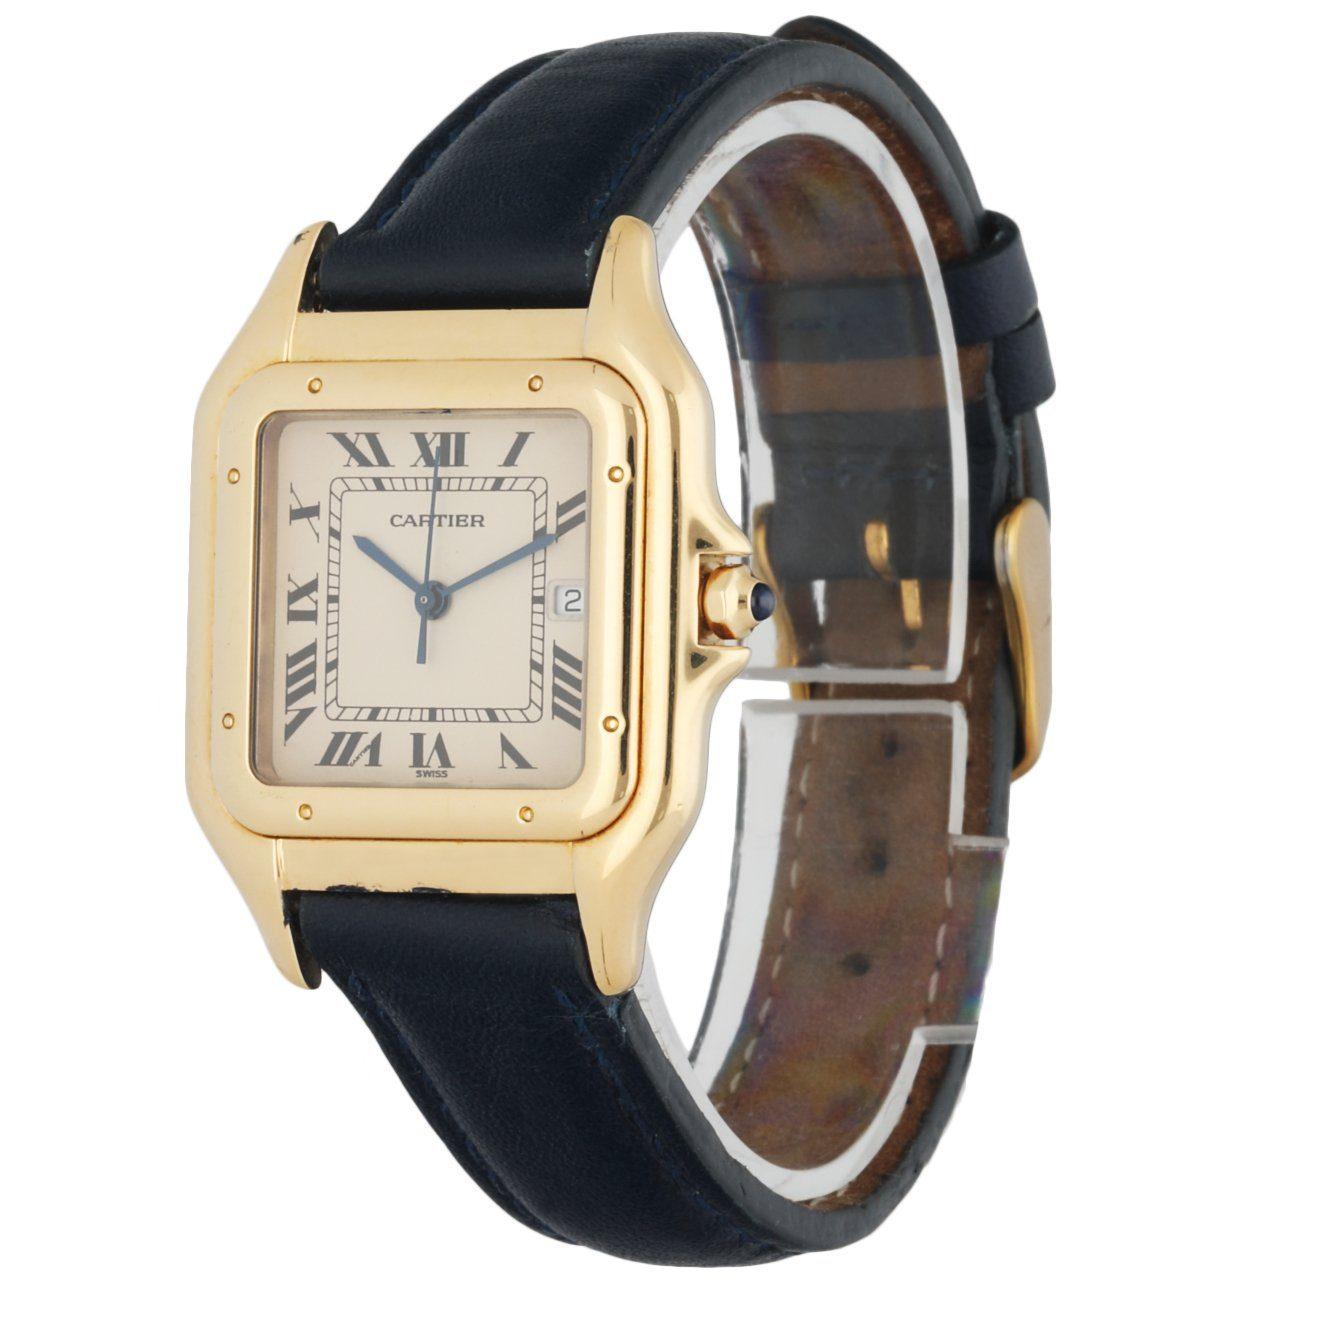 Cartier Panthere Large Watch. 29mm 18k Yellow Gold case. 18K Yellow Gold bezel. Off-White dial with Blue steel hands and black Roman numeral hour markers. Minute markers on the inner dial. Date display at the 3 o'clock position. Black leather strap